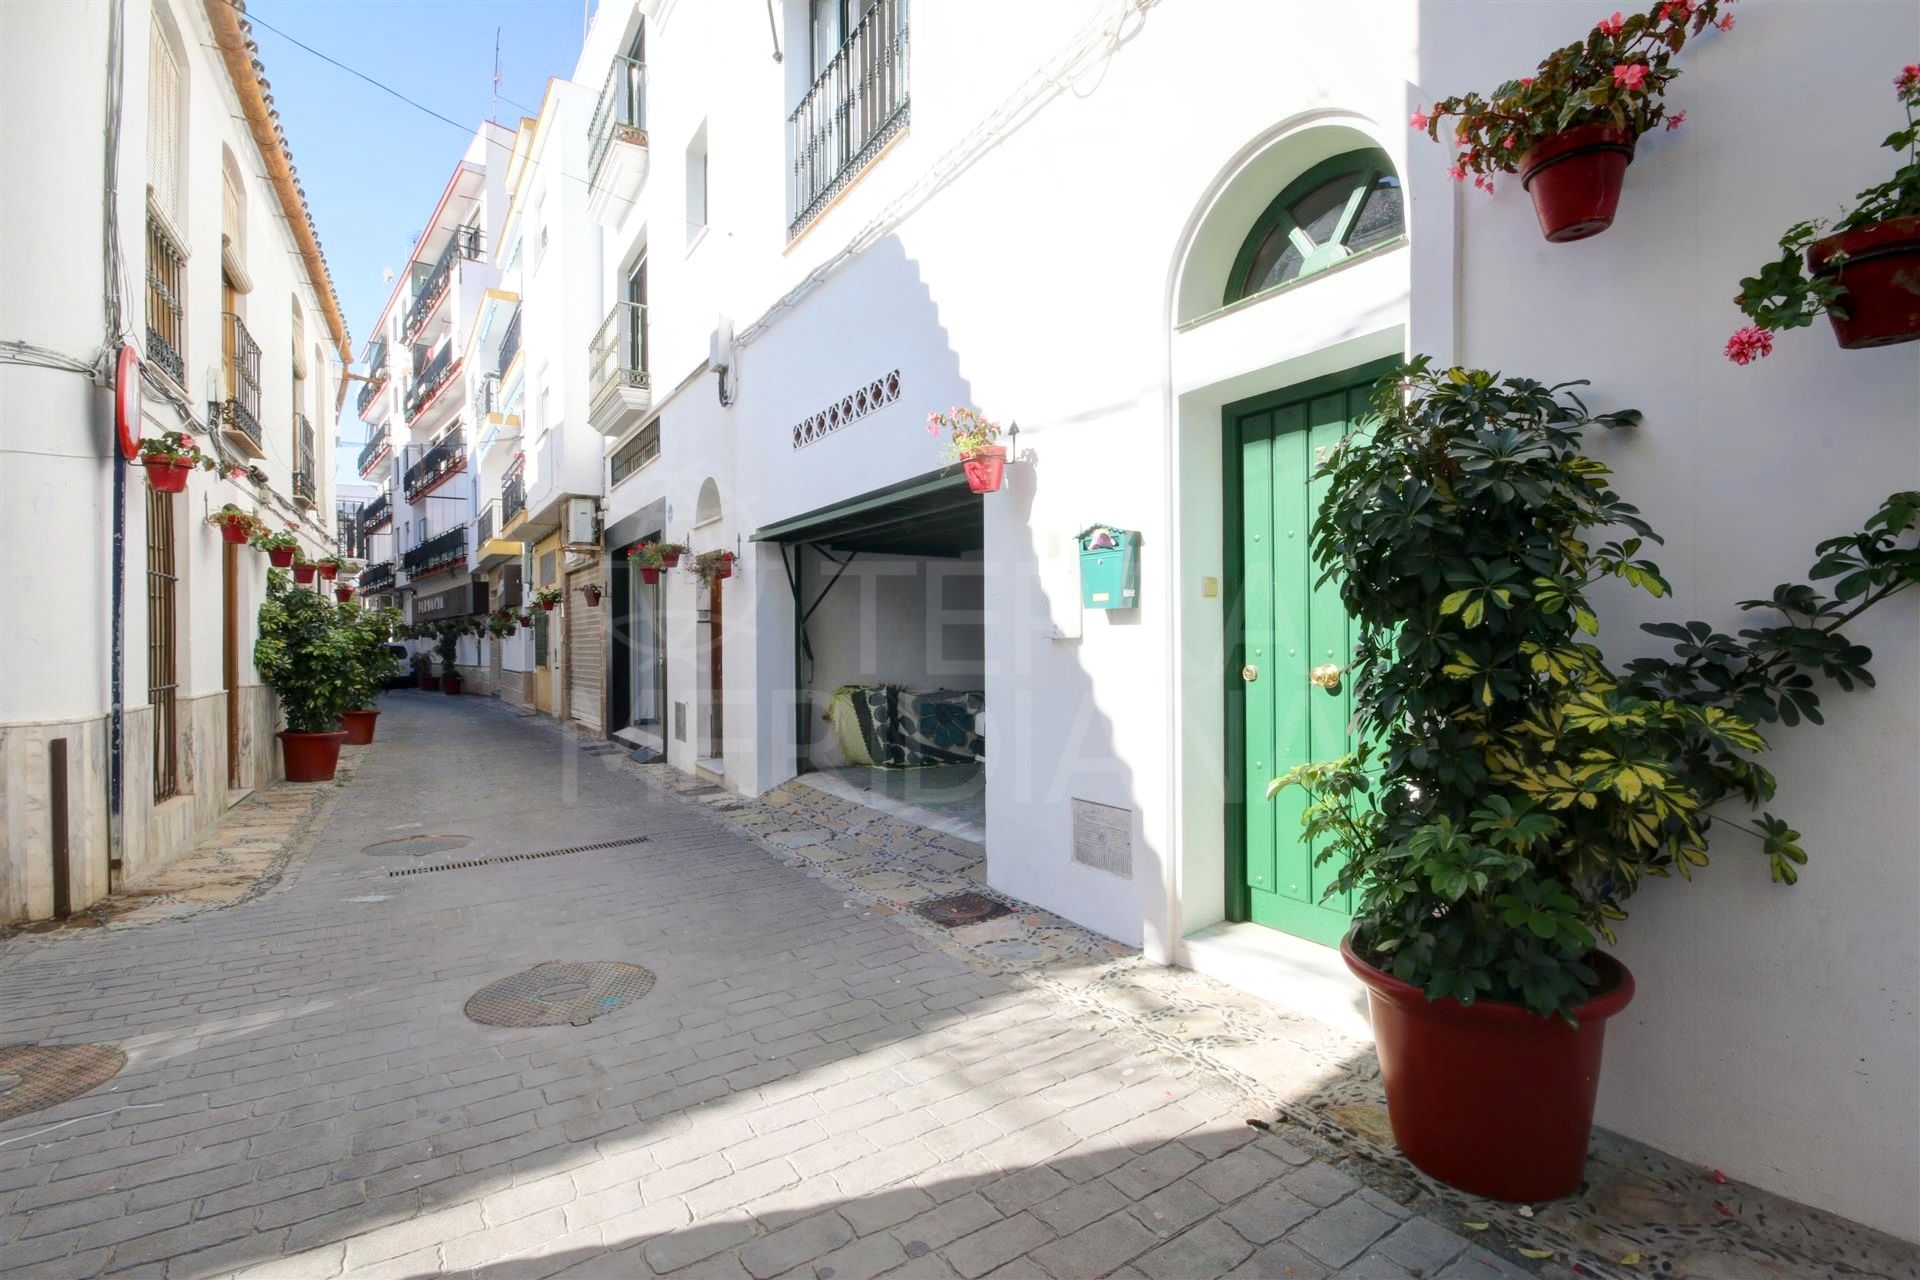 Town house in move-in conditionfor sale with private garage, Estepona old town centre. close to the beach